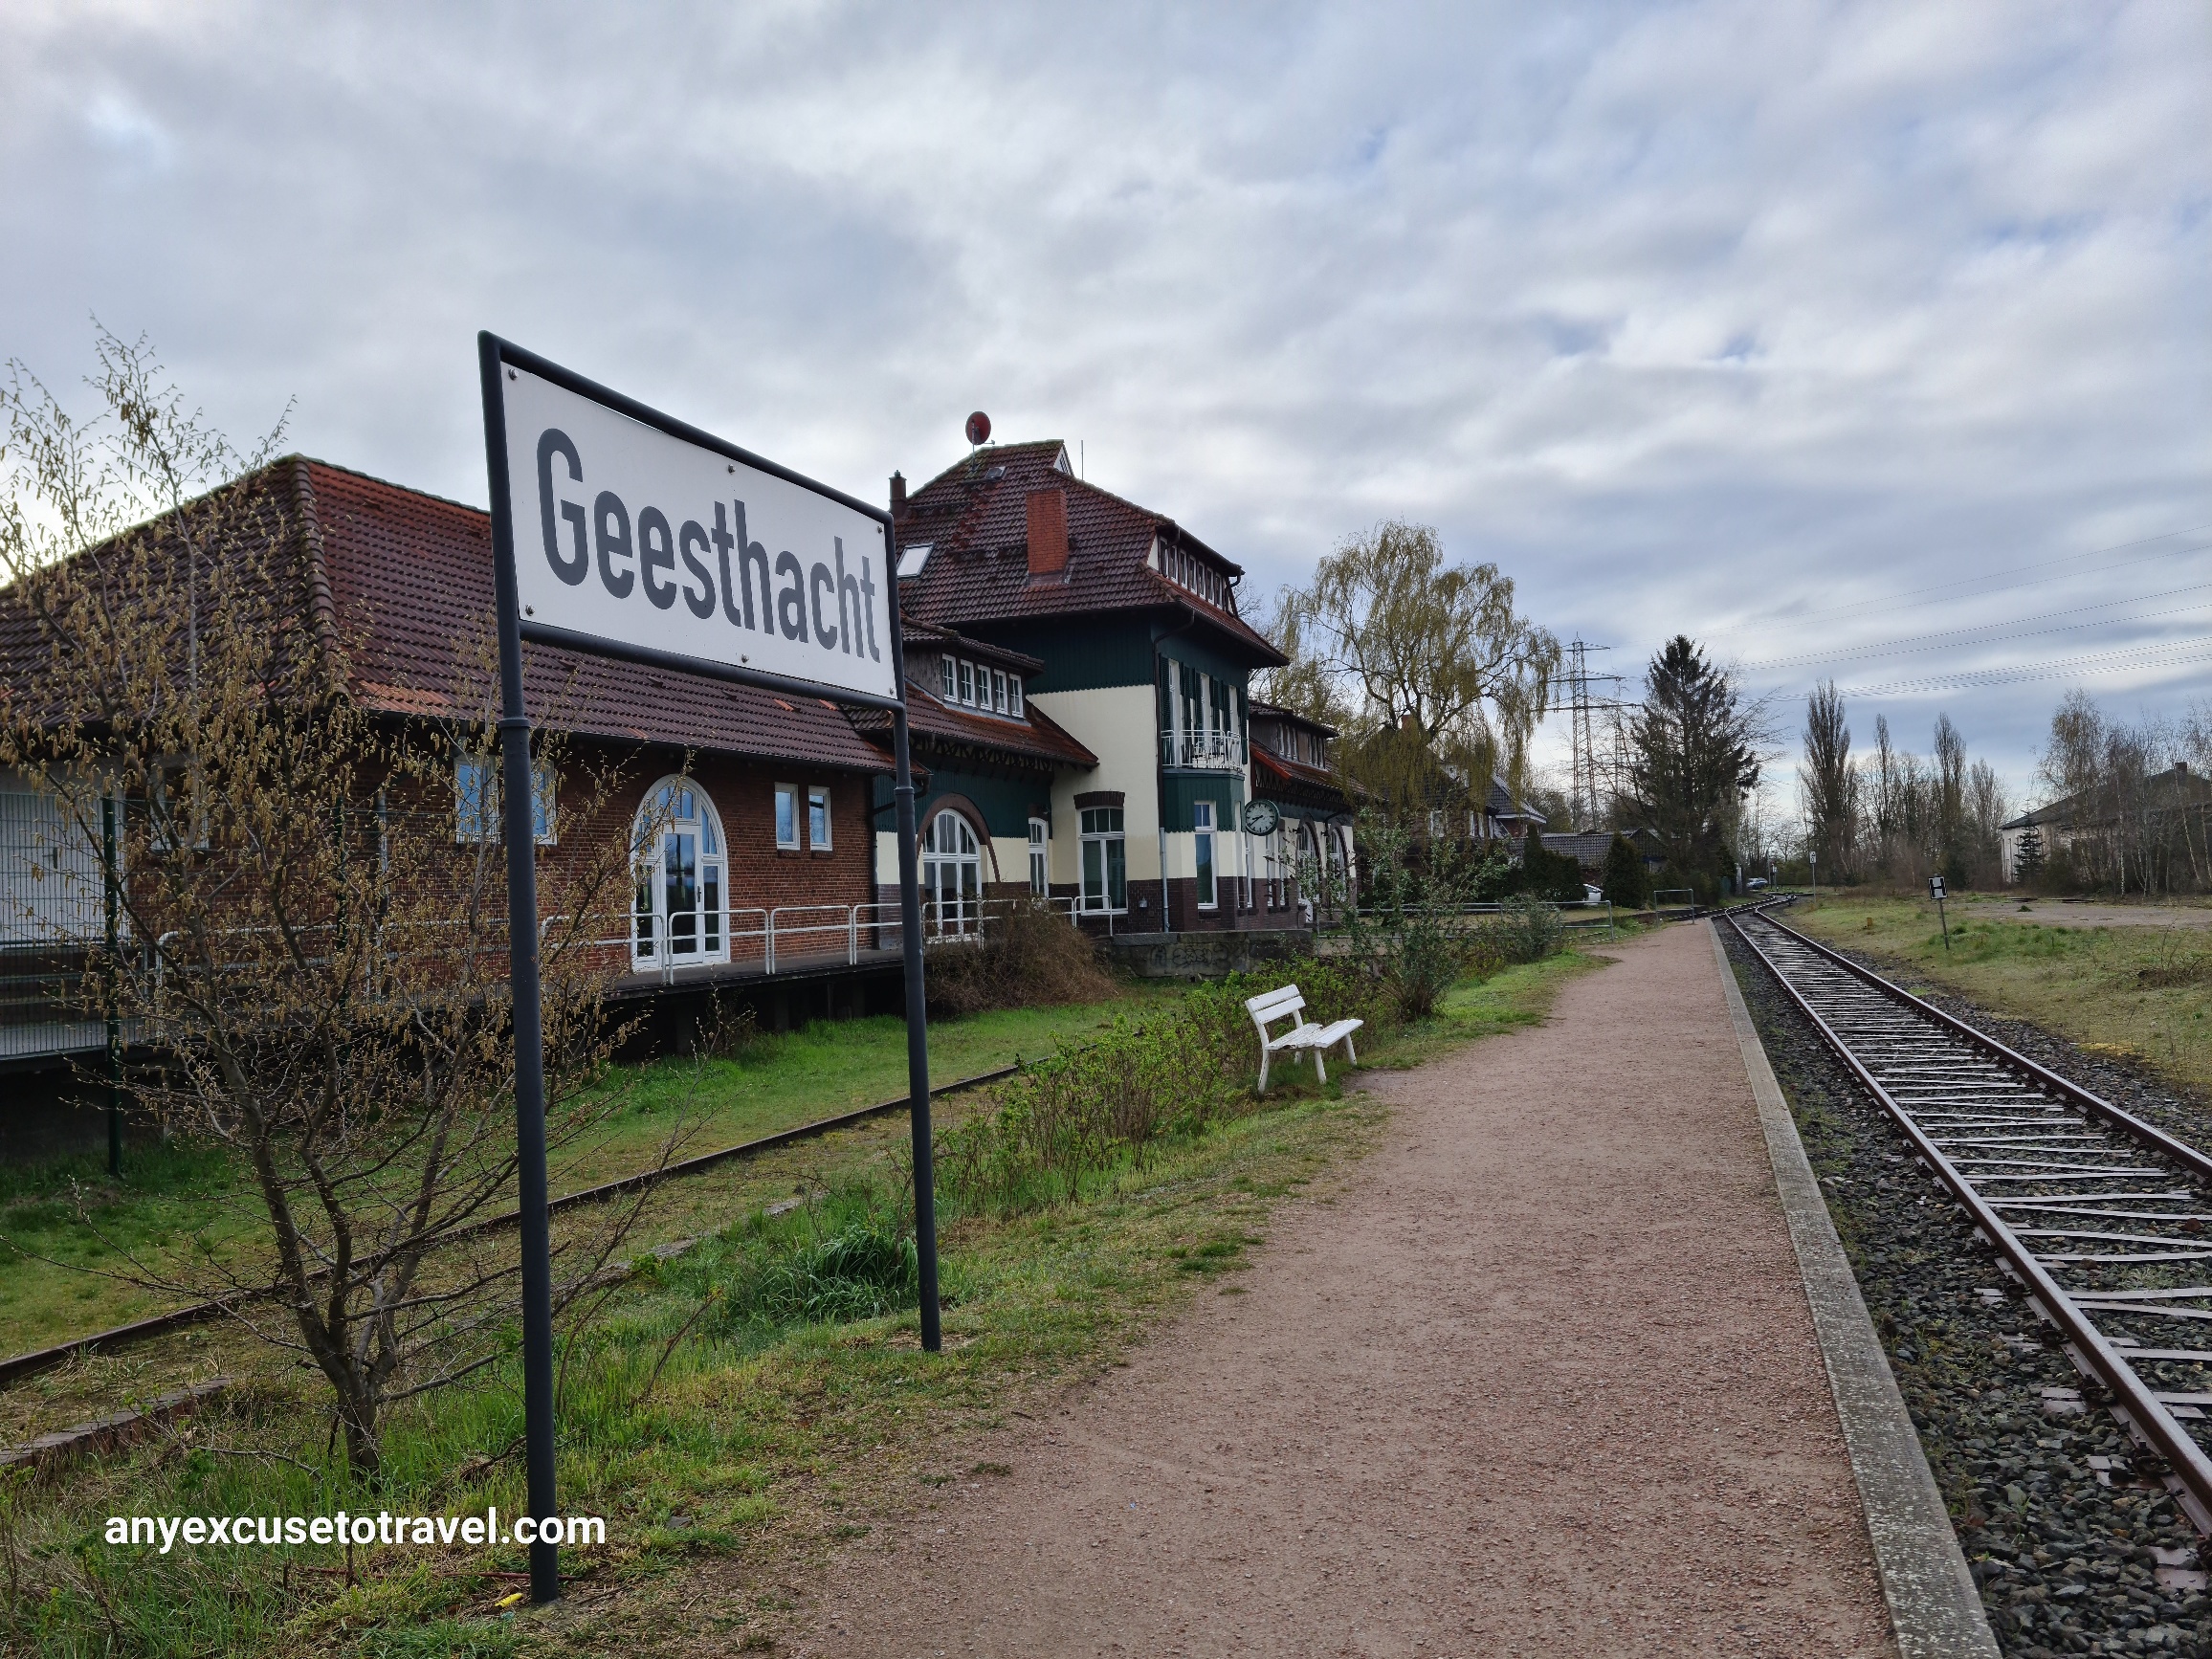 Sign - black letters spell Geesthacht on a white background - beside a railway track with a redbricked train station in the background to the left